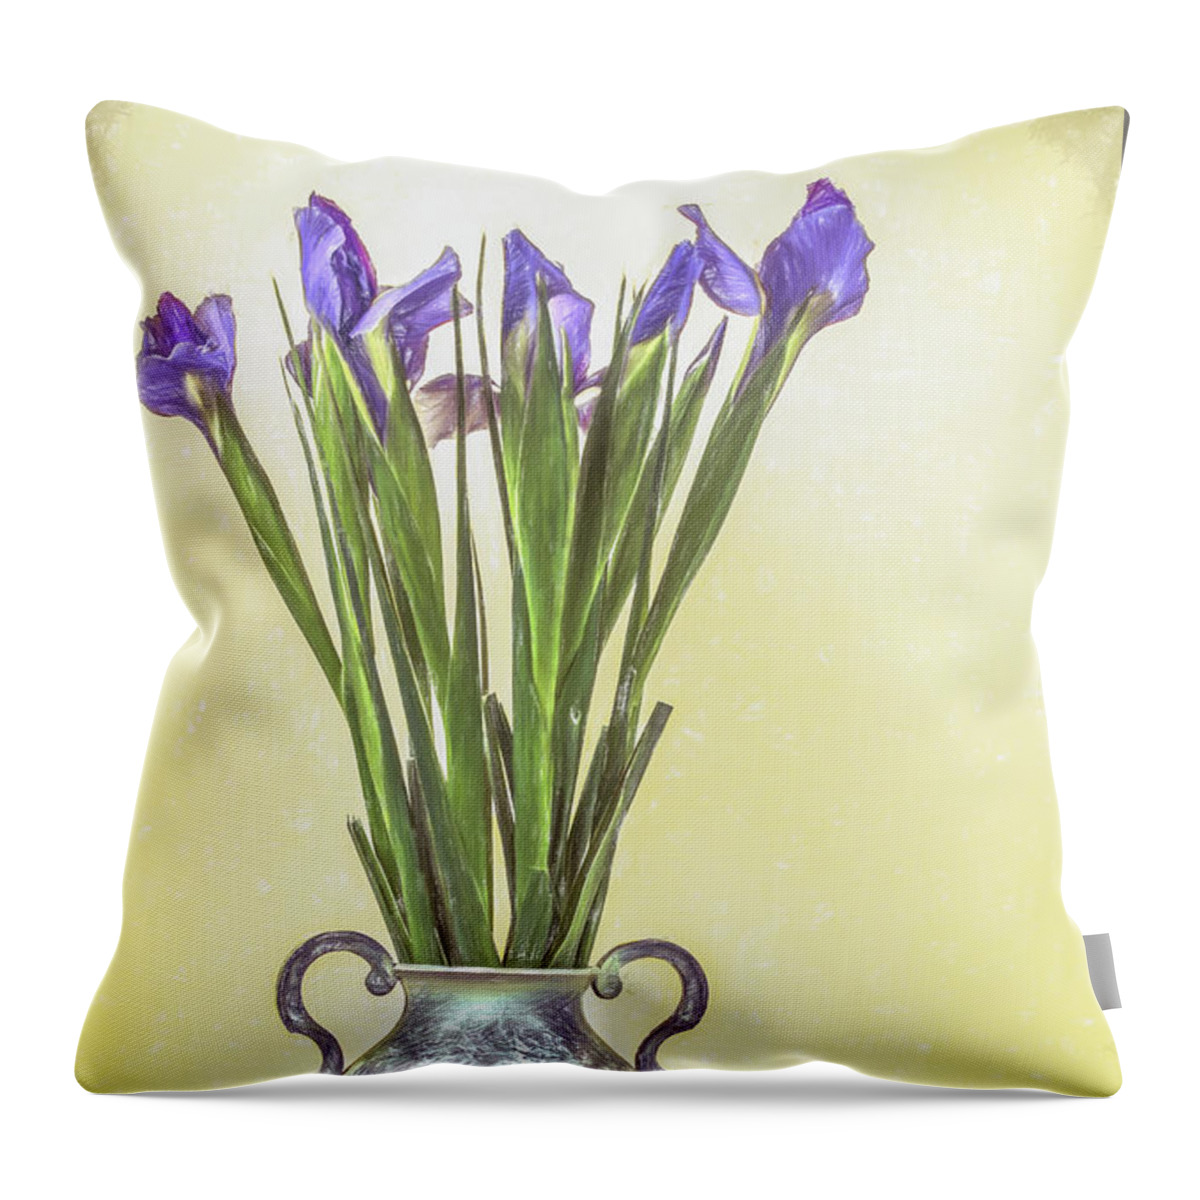 Impressionism Throw Pillow featuring the photograph Spring Bouquet by Jennifer Grossnickle